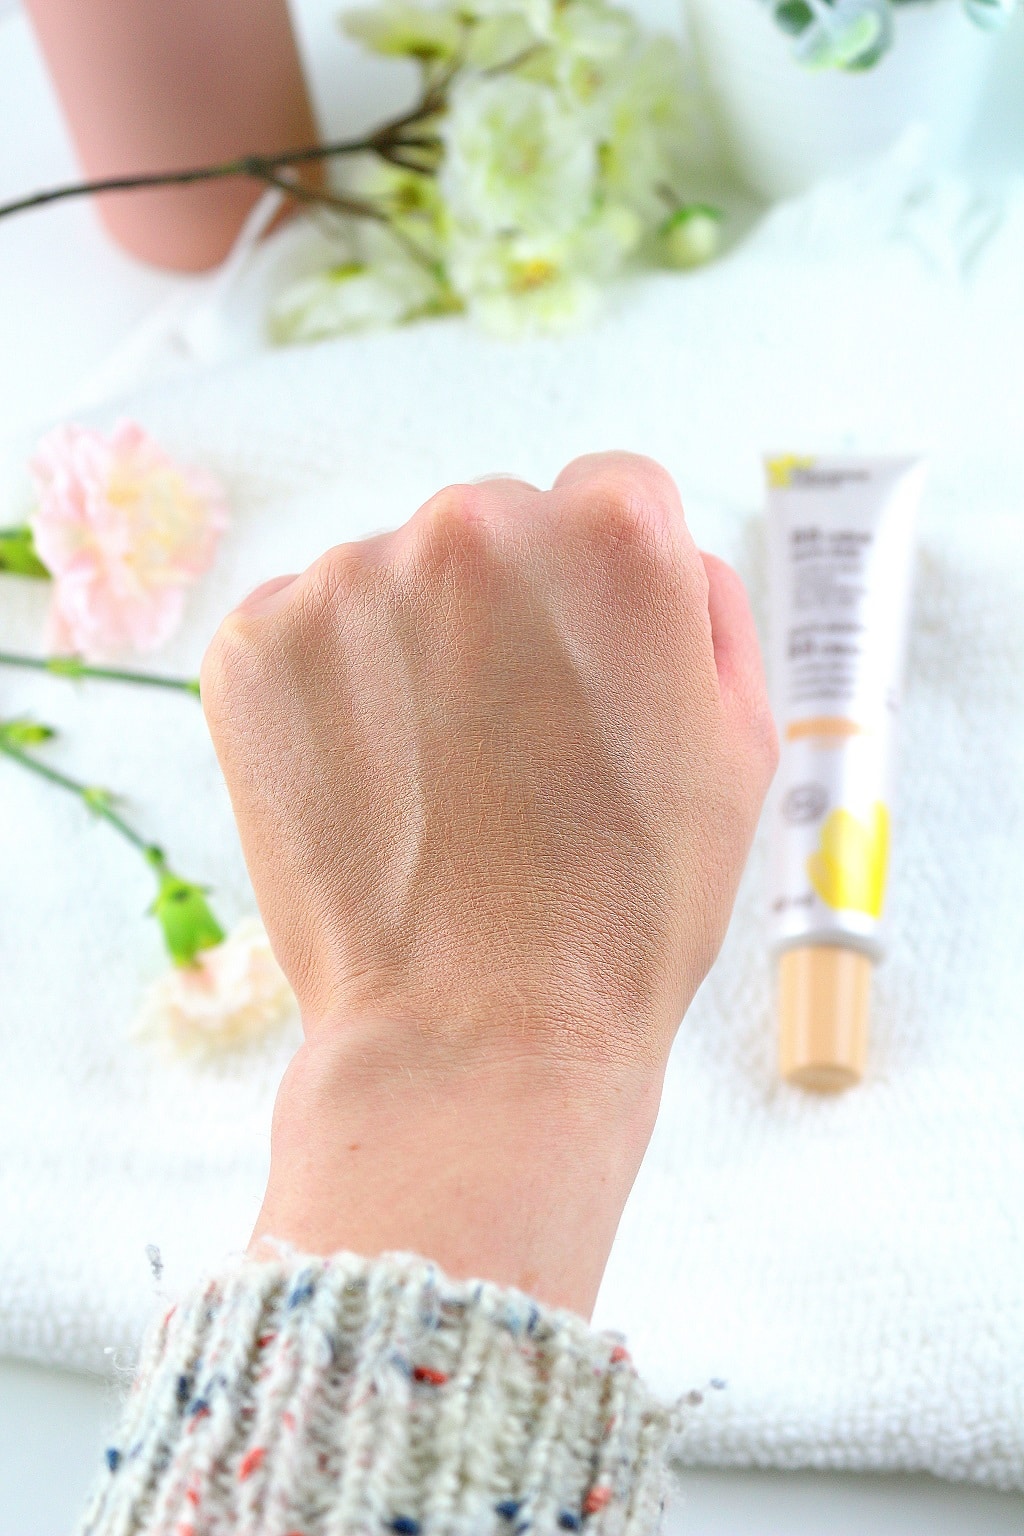 swatch bb crème fleurance nature - only laurie